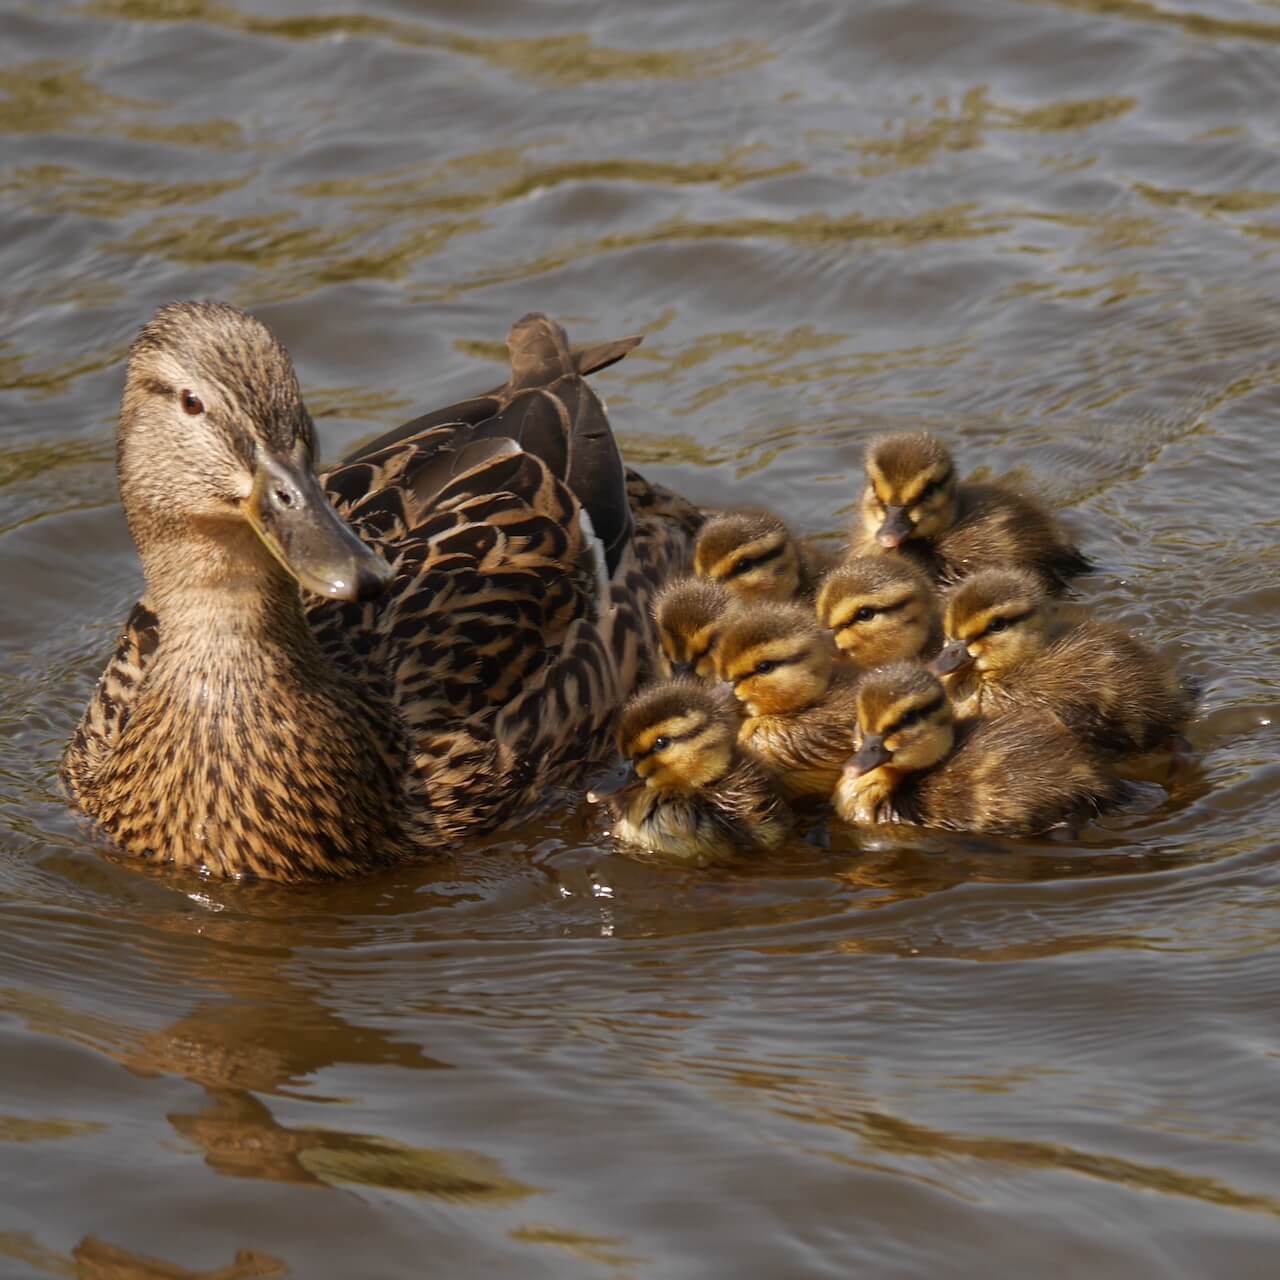 Ducklings huddled close to their mum